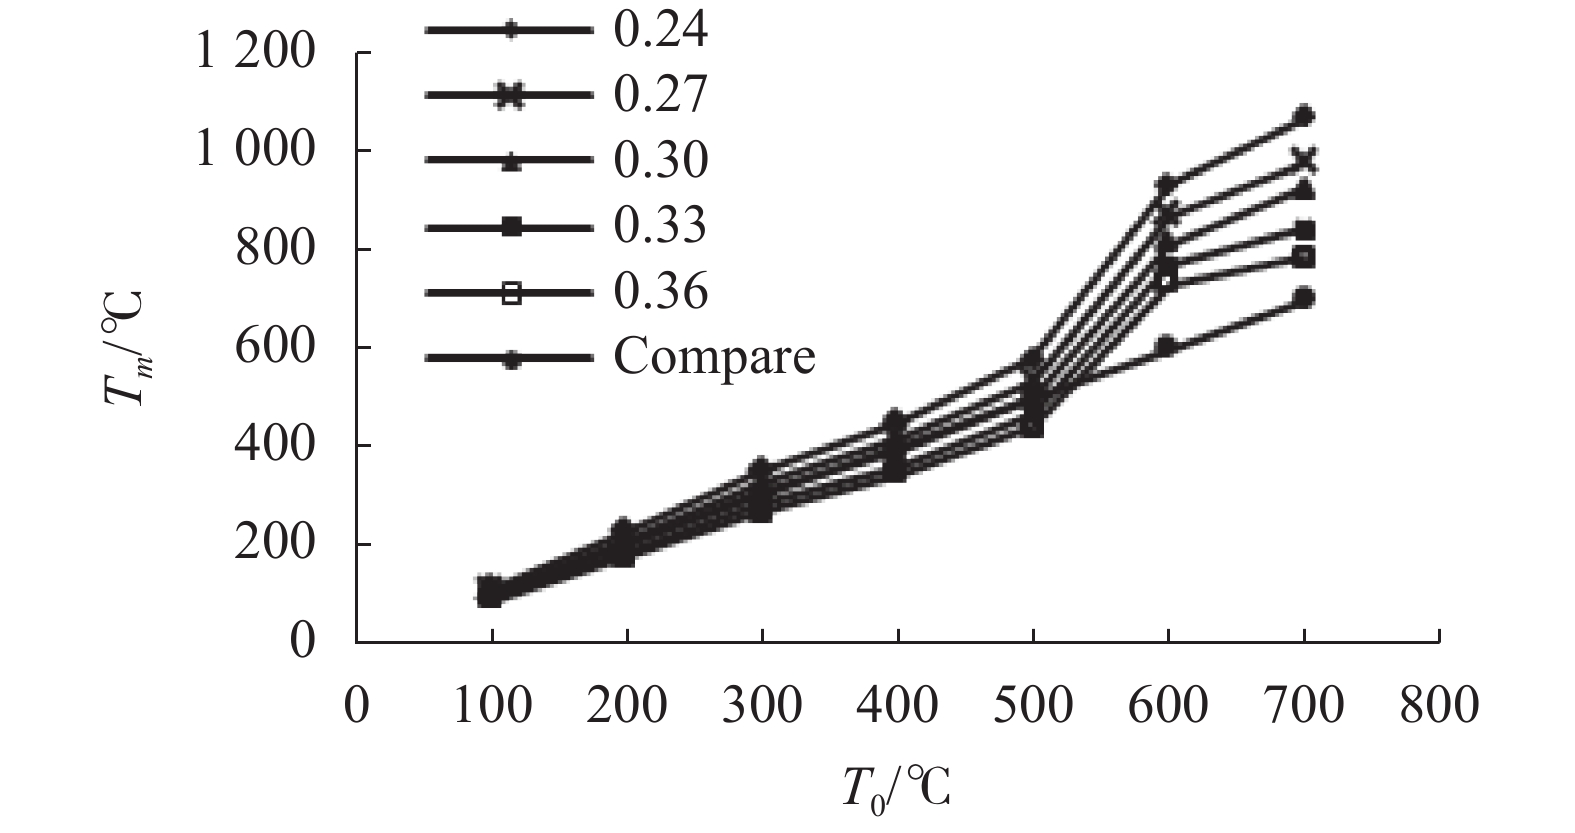 Difference between measured and actual temperature when the emissivity is 0.3